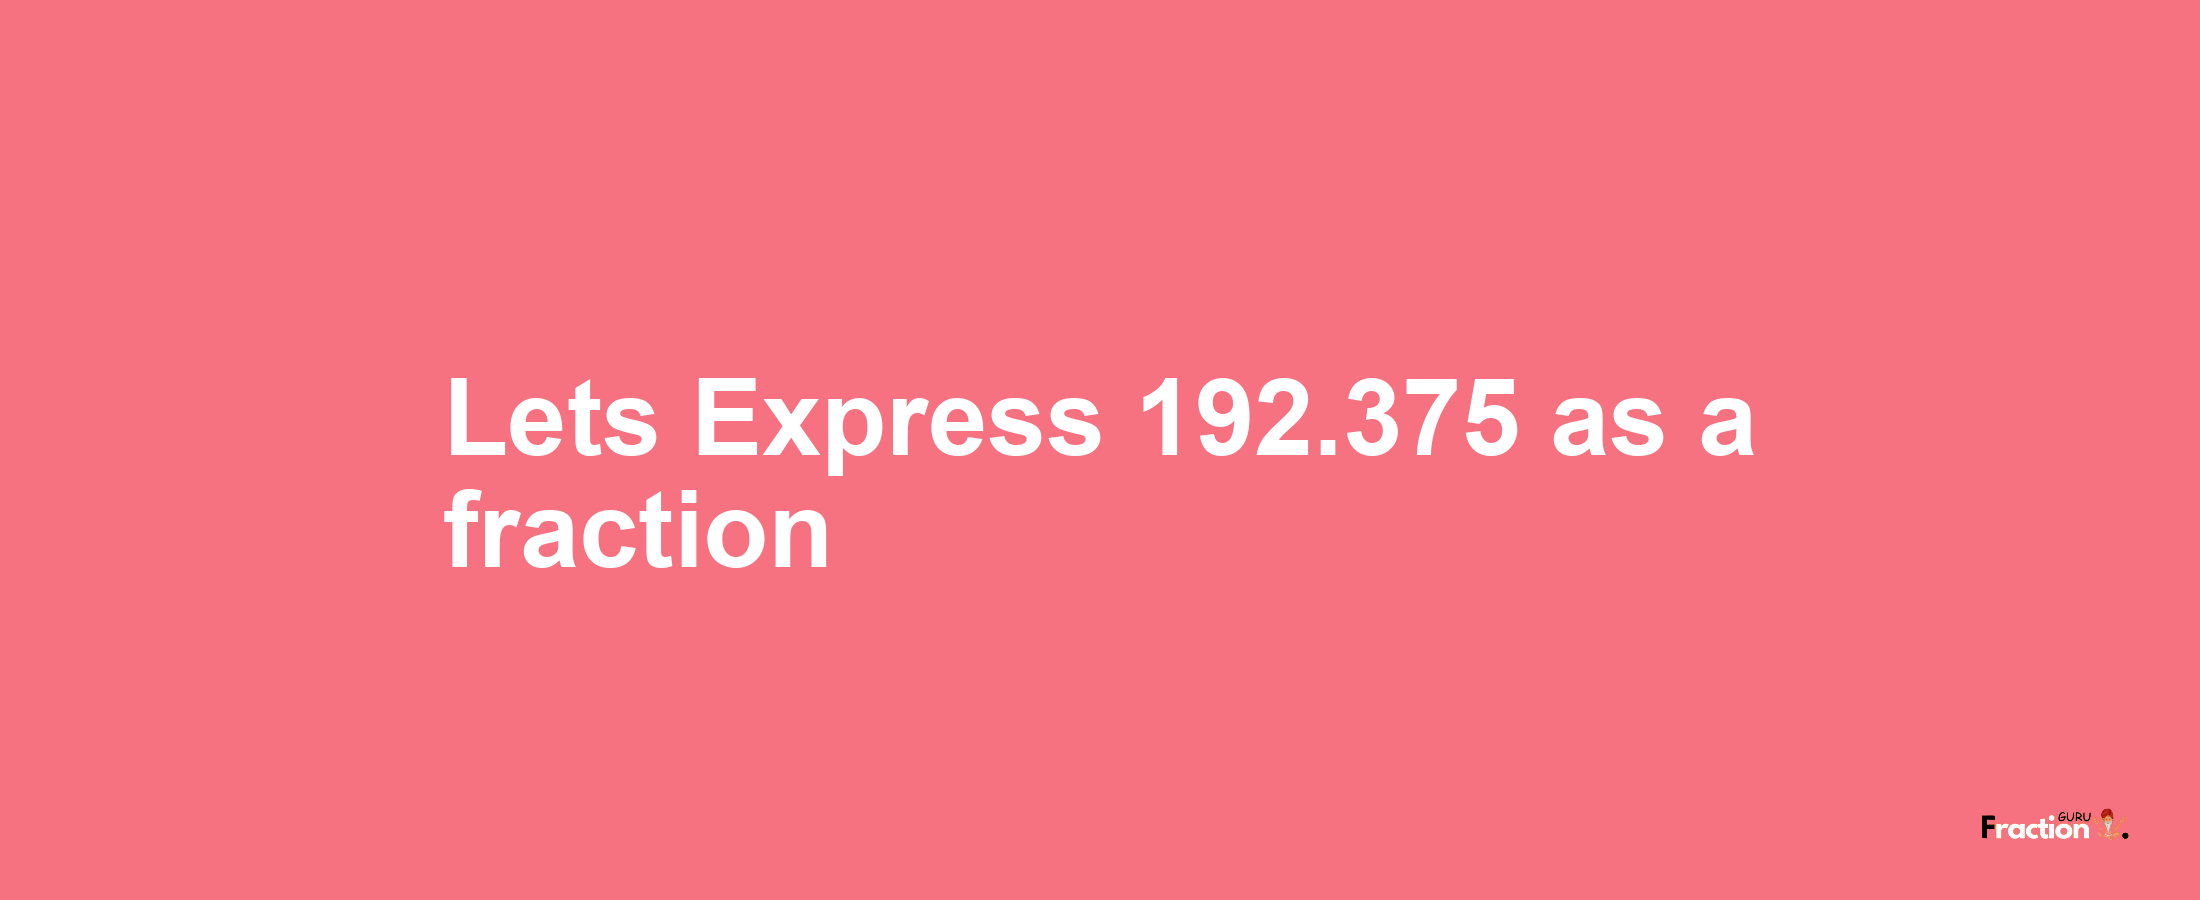 Lets Express 192.375 as afraction